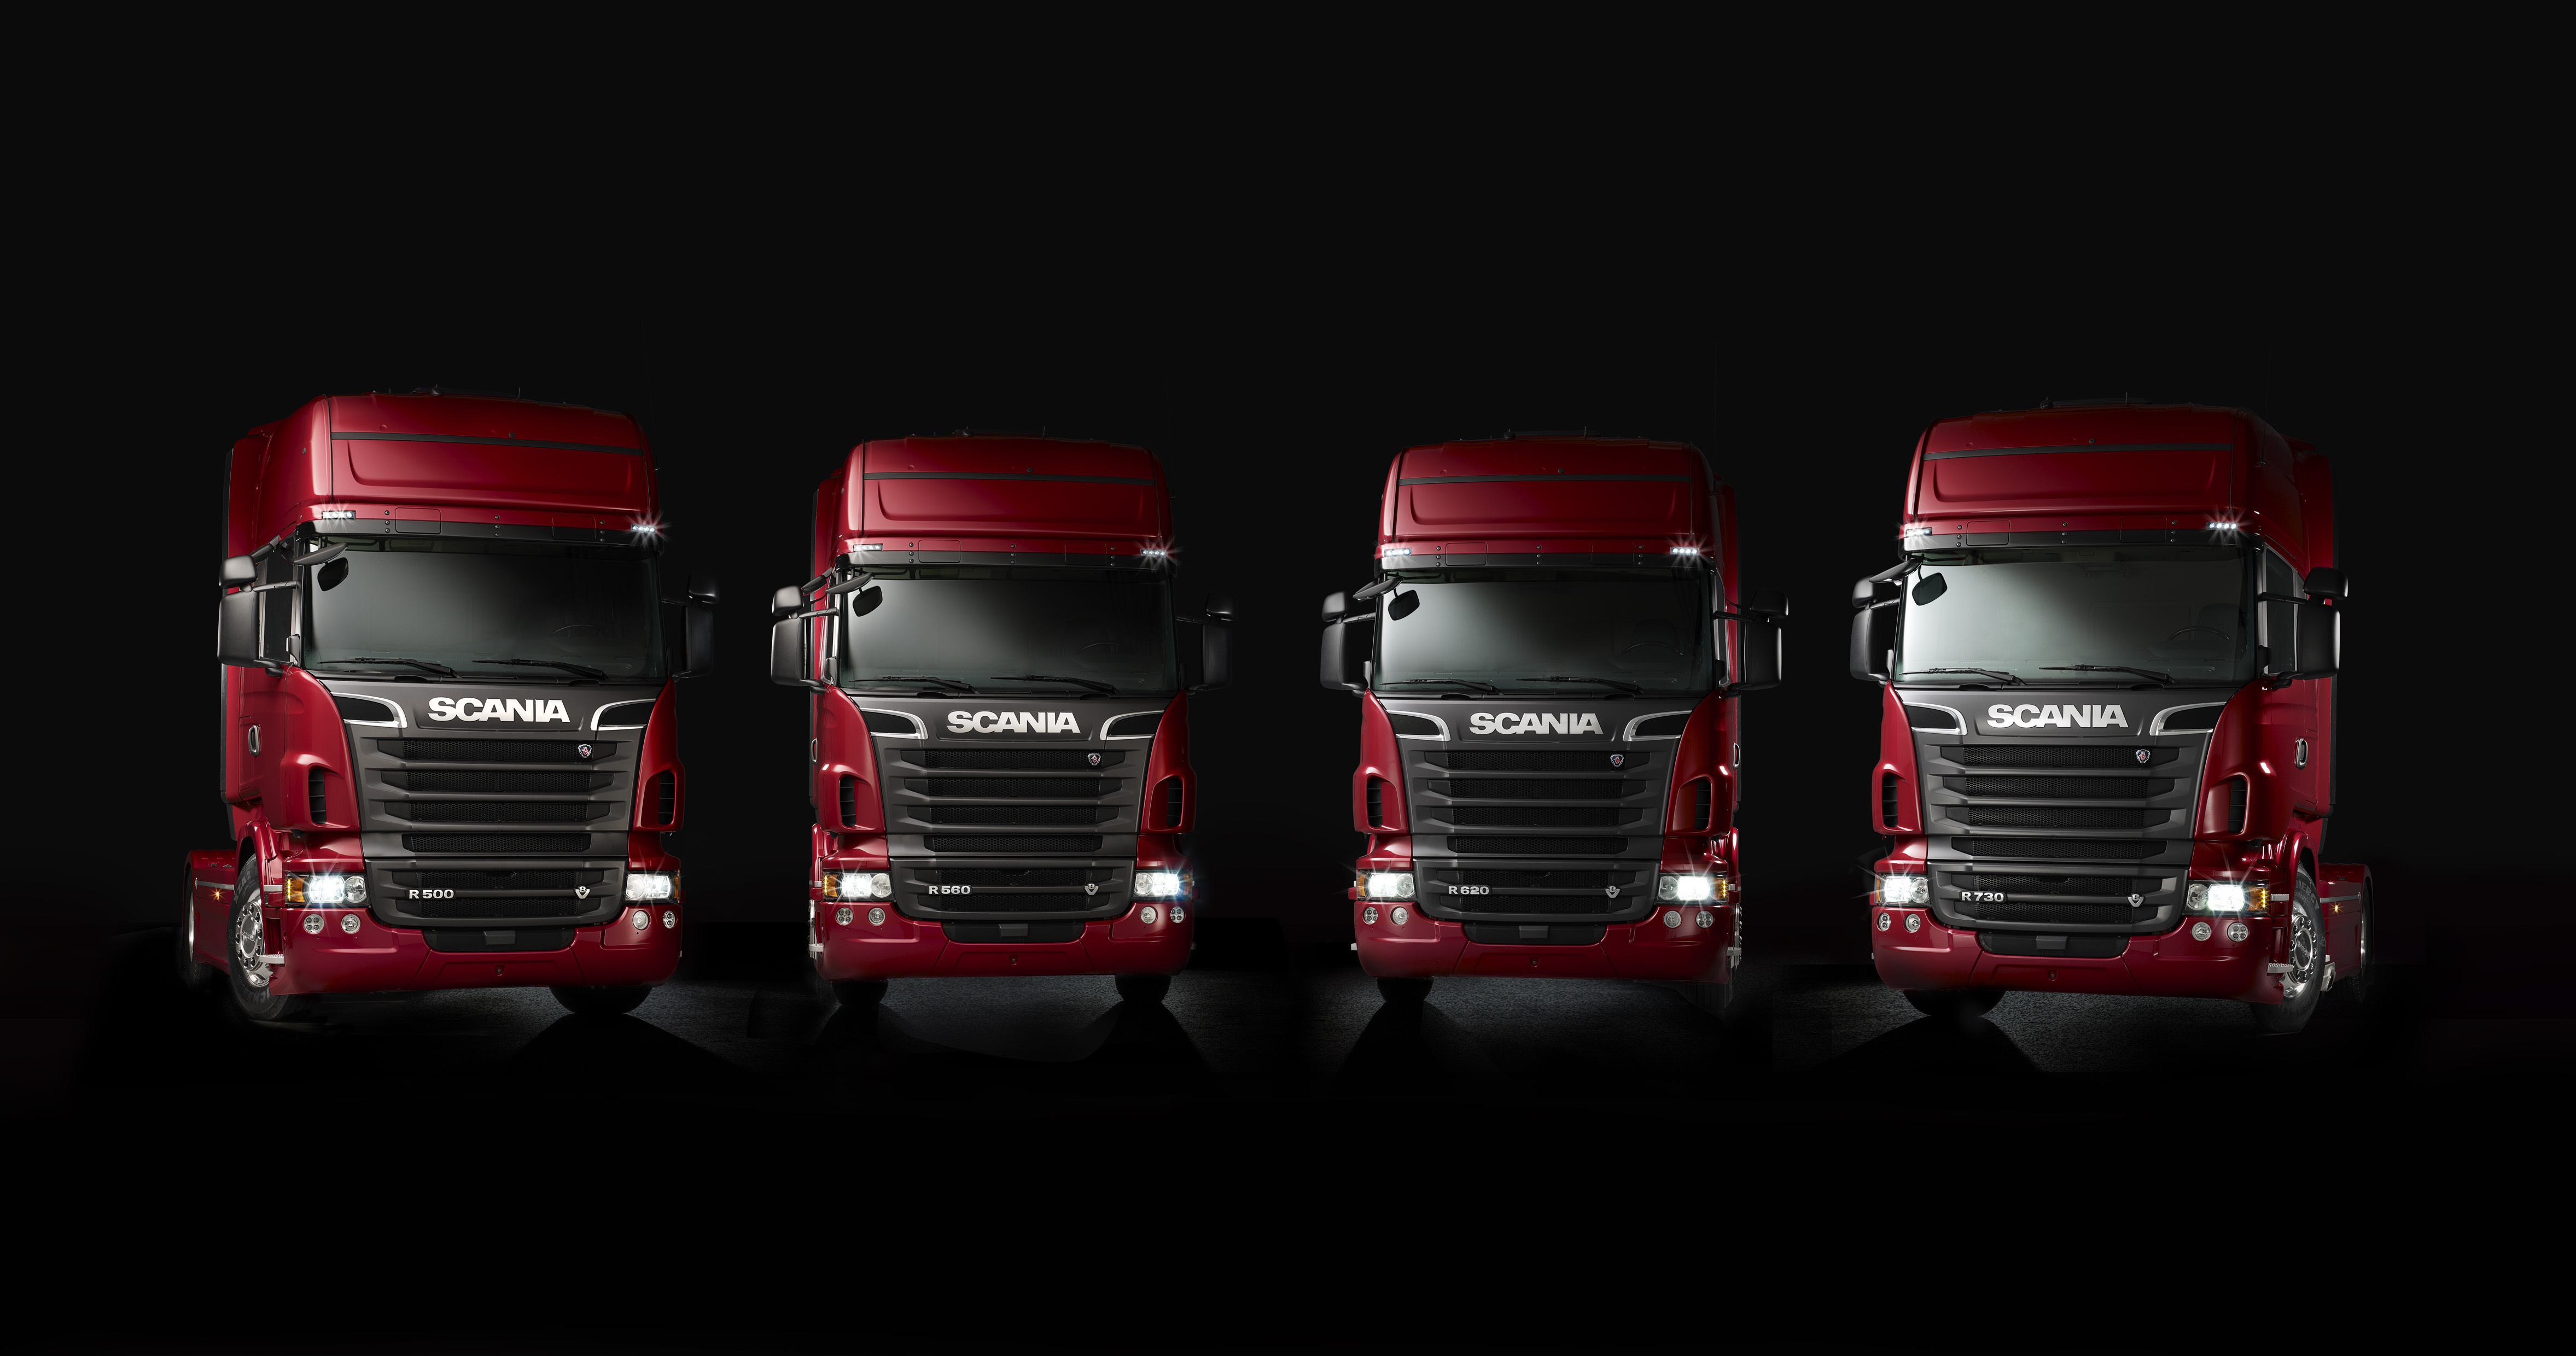  Trucks Scania Wallpaper Background Wallpaper with 4710x2480 Resolution